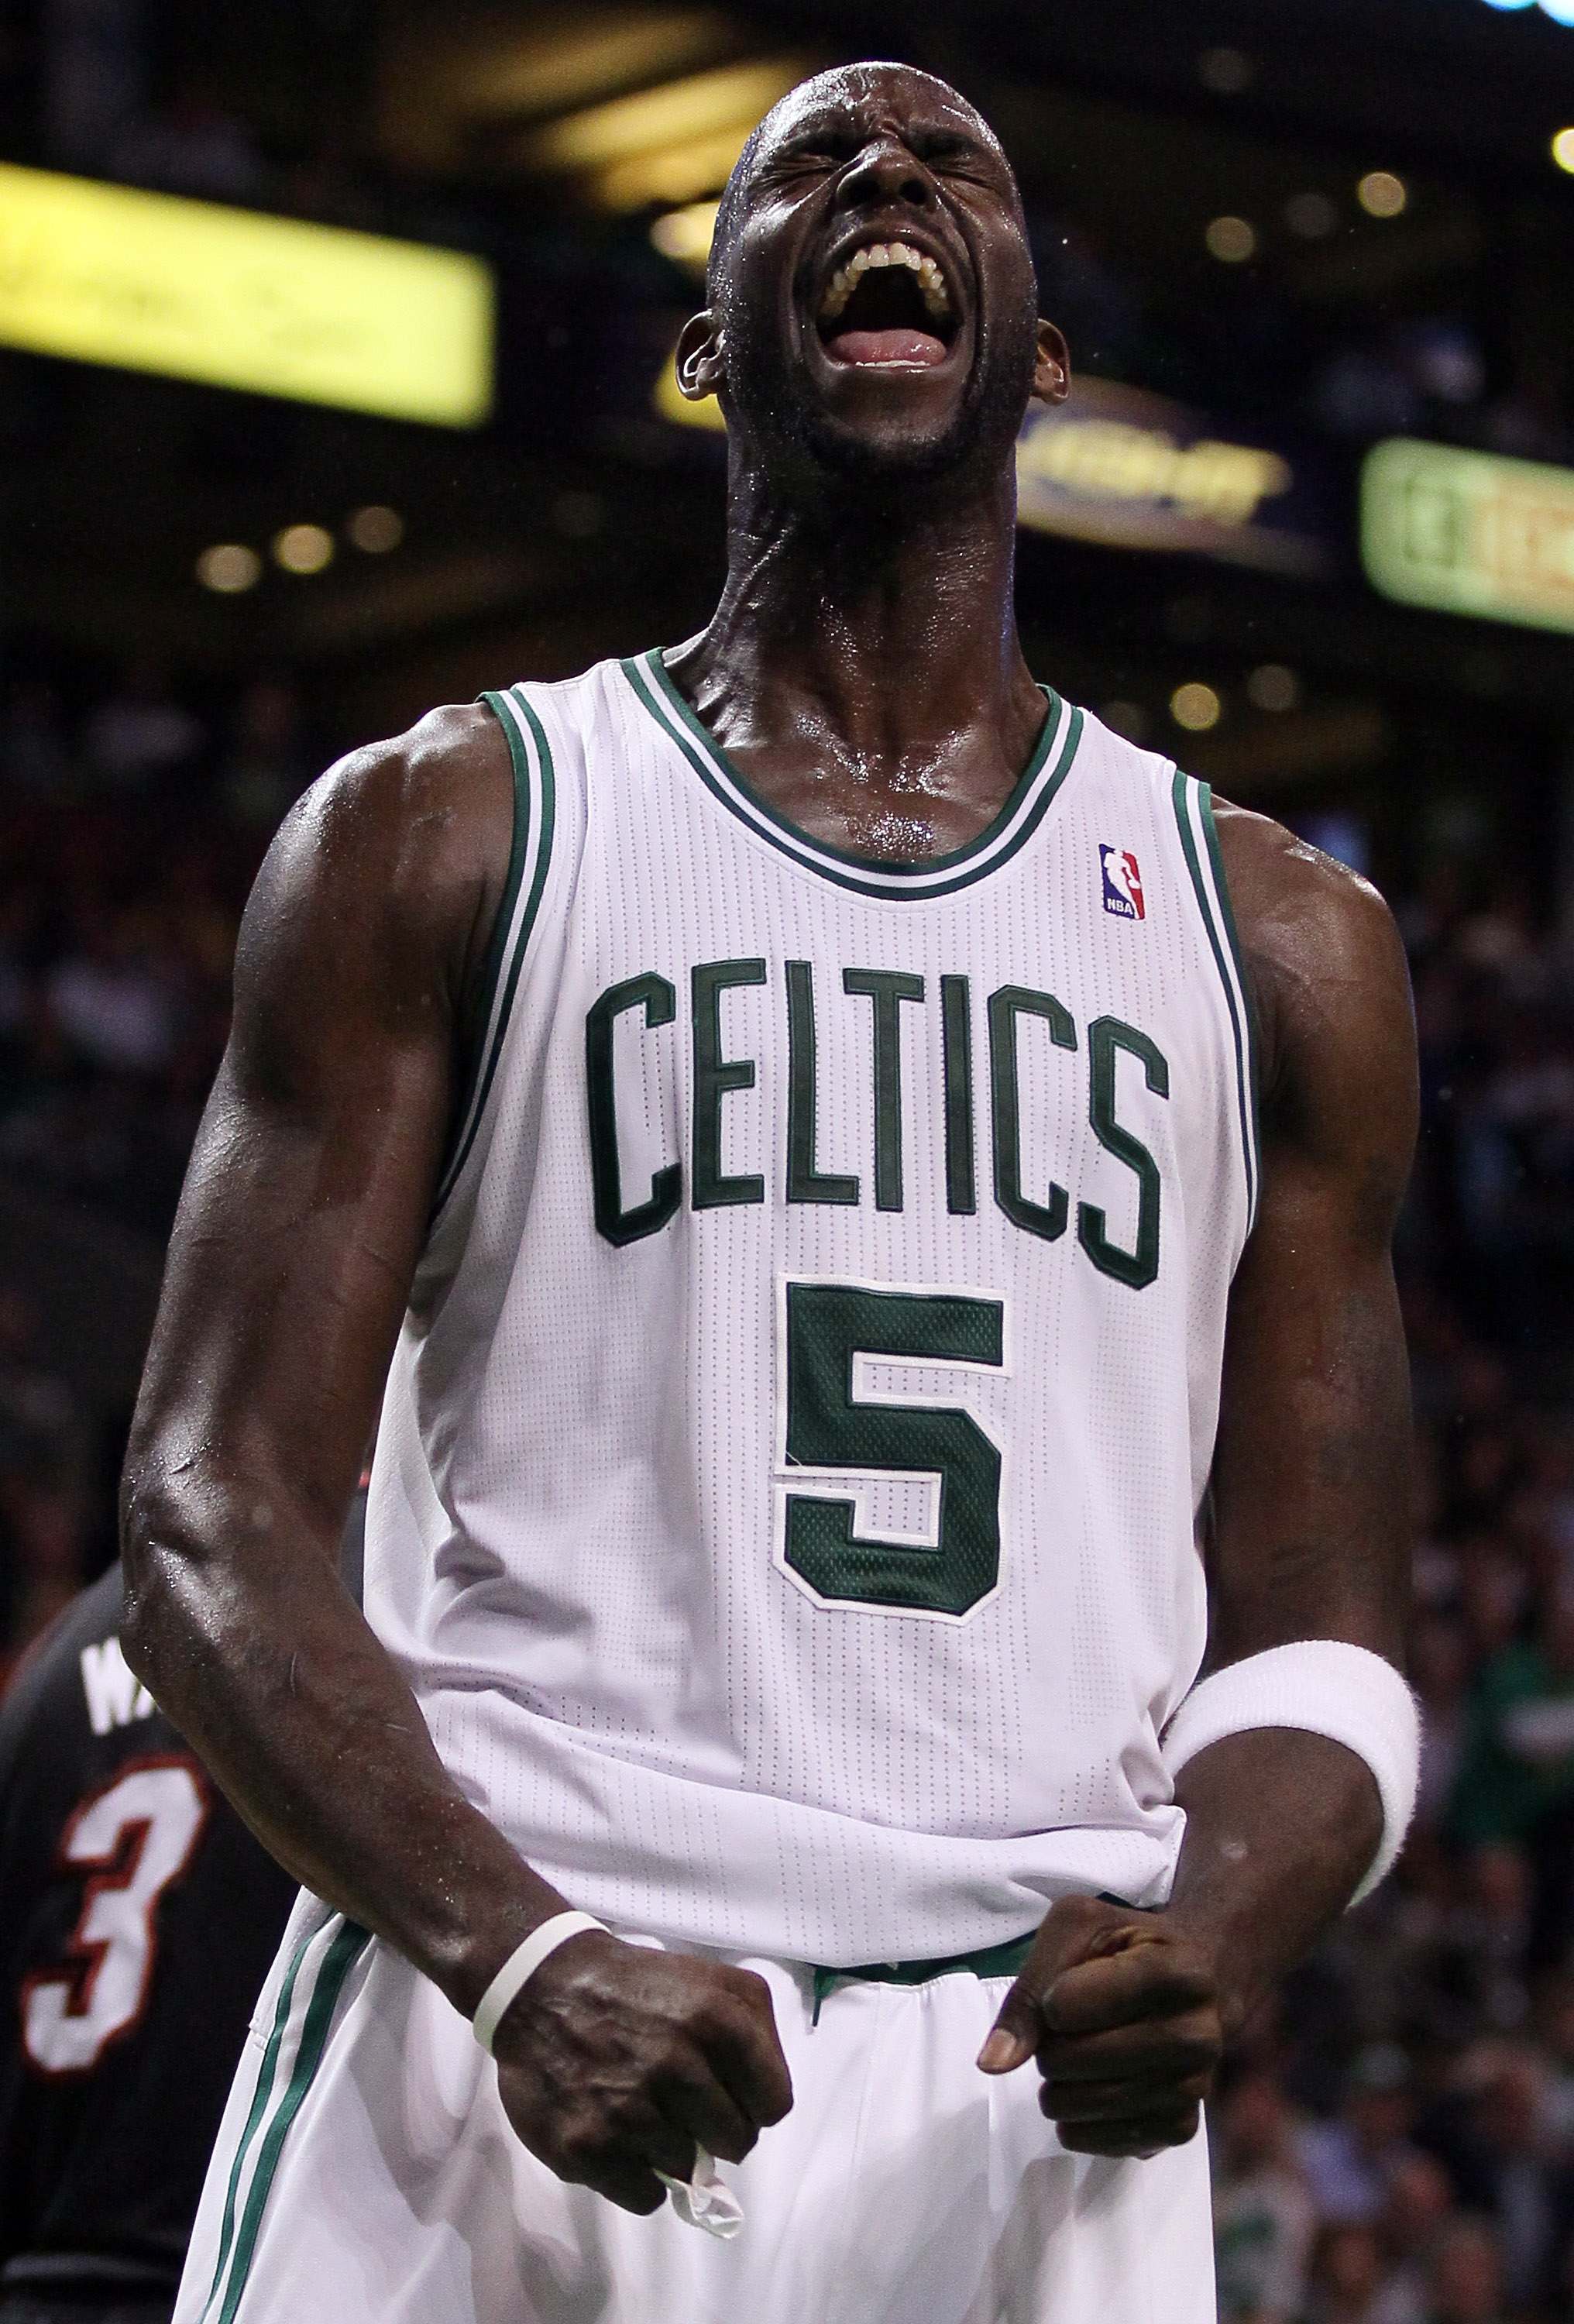 BOSTON, MA - MAY 09:  Kevin Garnett #5 of the Boston Celtics reacts after a foul is called on the Miami Heat in Game Four of the Eastern Conference Semifinals in the 2011 NBA Playoffs on May 9, 2011 at the TD Garden in Boston, Massachusetts.  NOTE TO USER